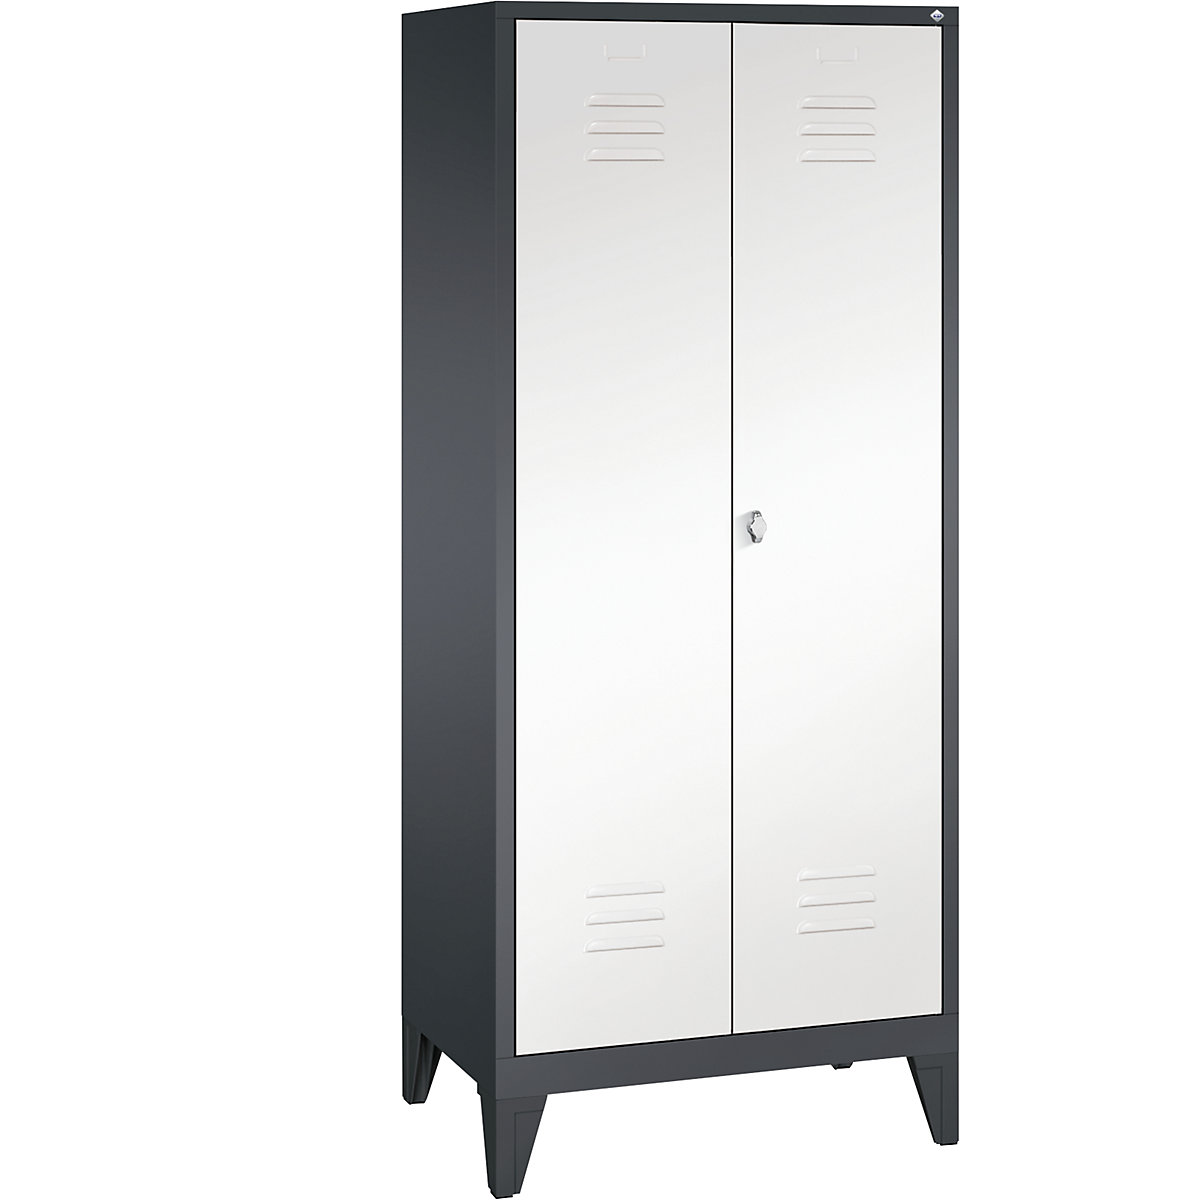 CLASSIC equipment cupboard with feet – C+P, 2 compartments, compartment width 400 mm, black grey / traffic white-13